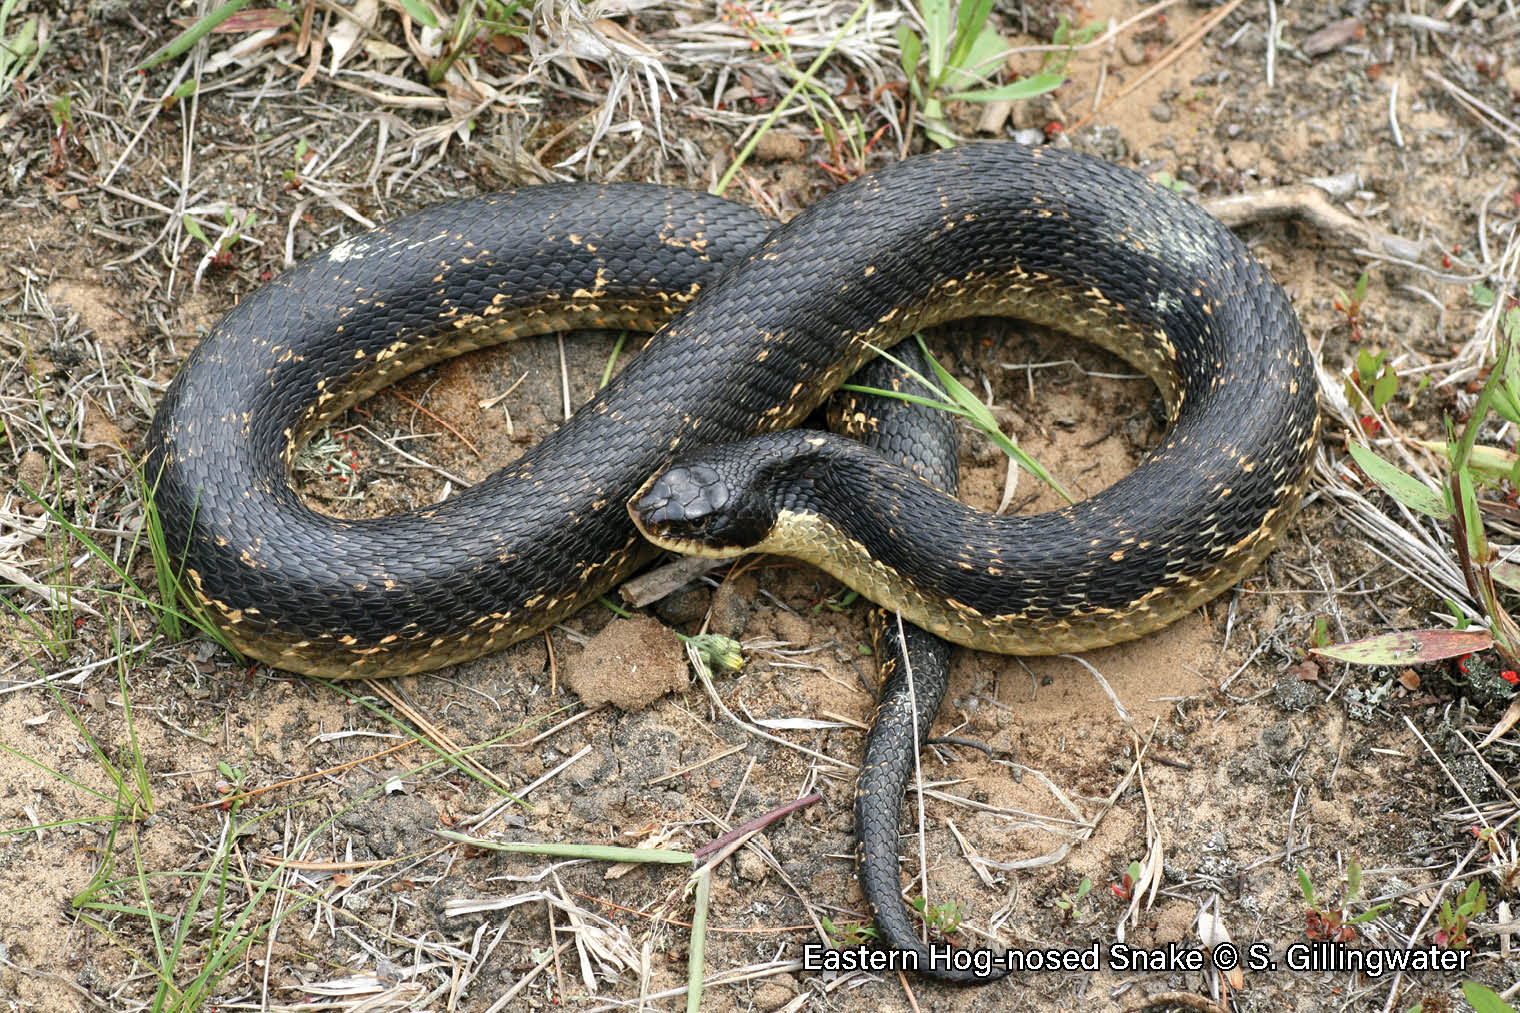 Picture of an Eastern Hog-nosed snake, a thick-bodied black snake and an upturned snout.